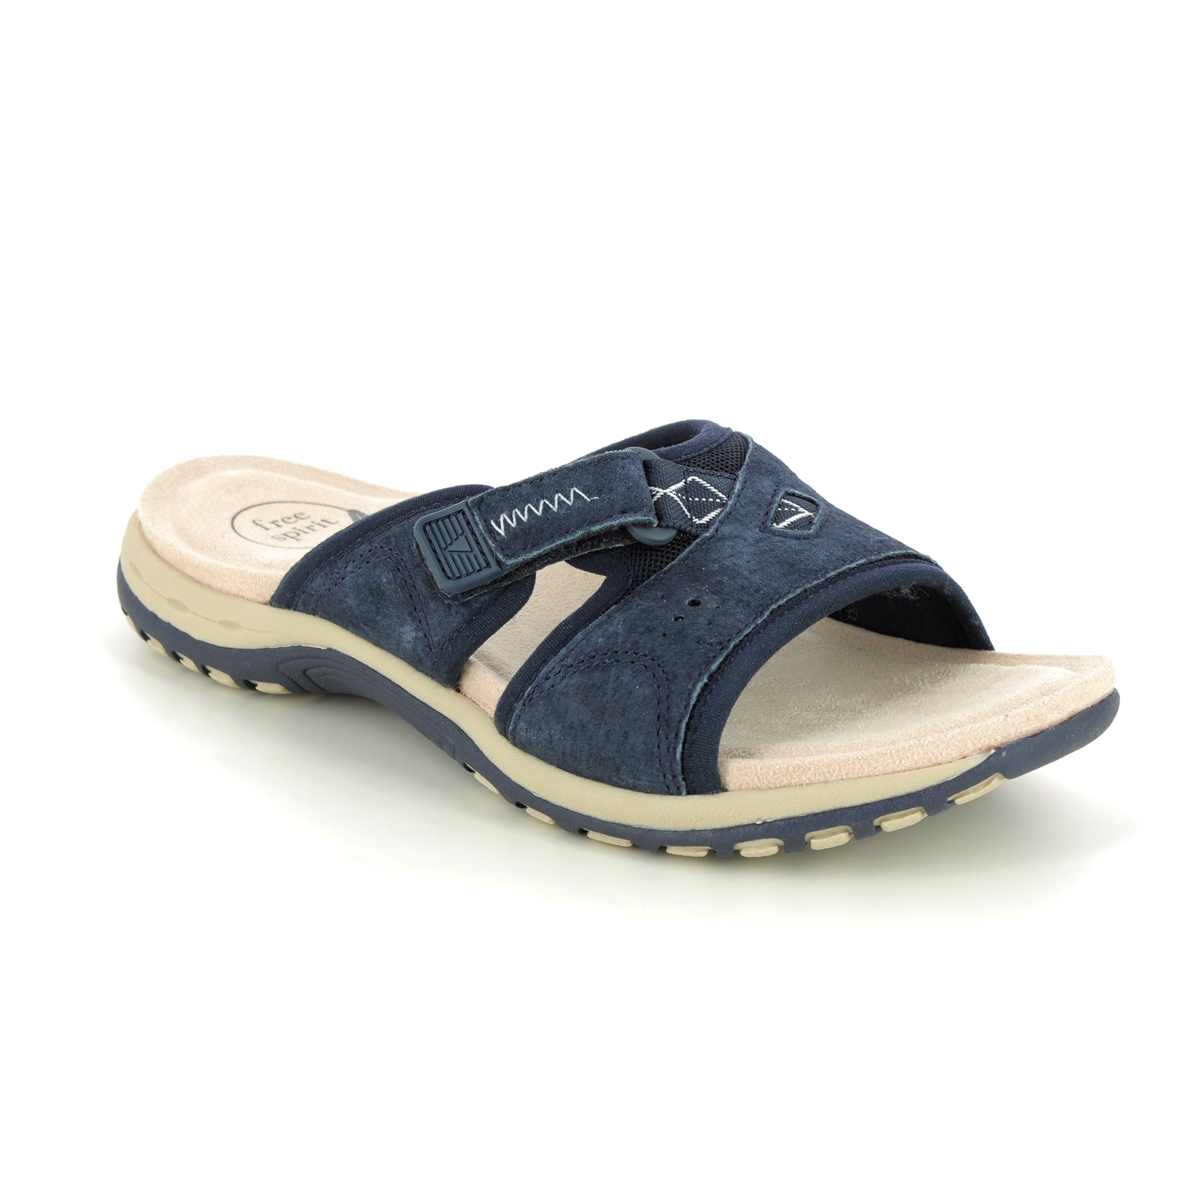 Earth Spirit Wickford Navy Suede Womens Slide Sandals 40517- In Size 7 In Plain Navy Suede